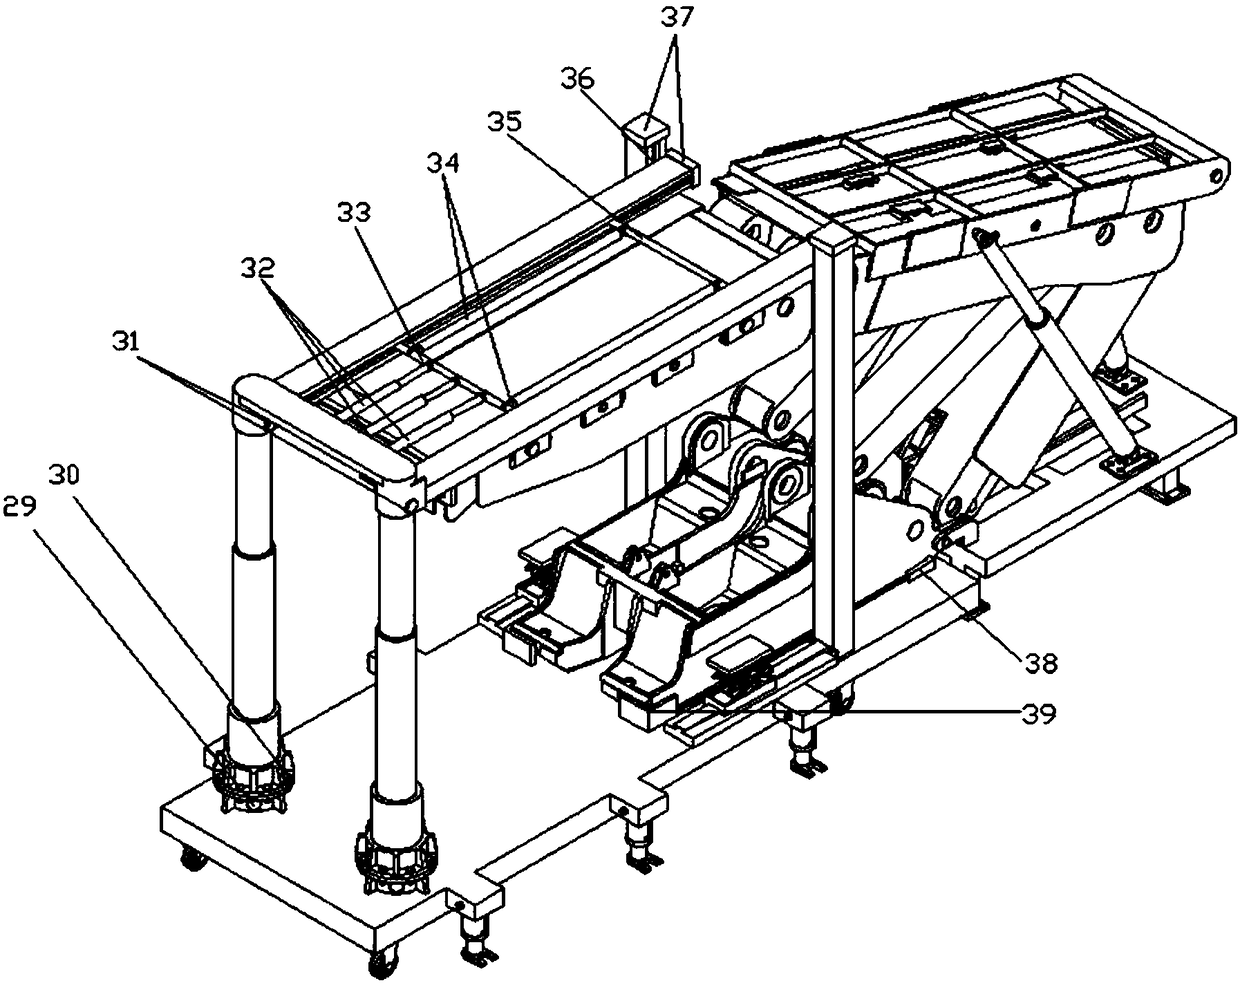 A hydraulic support installation mechanism and its application